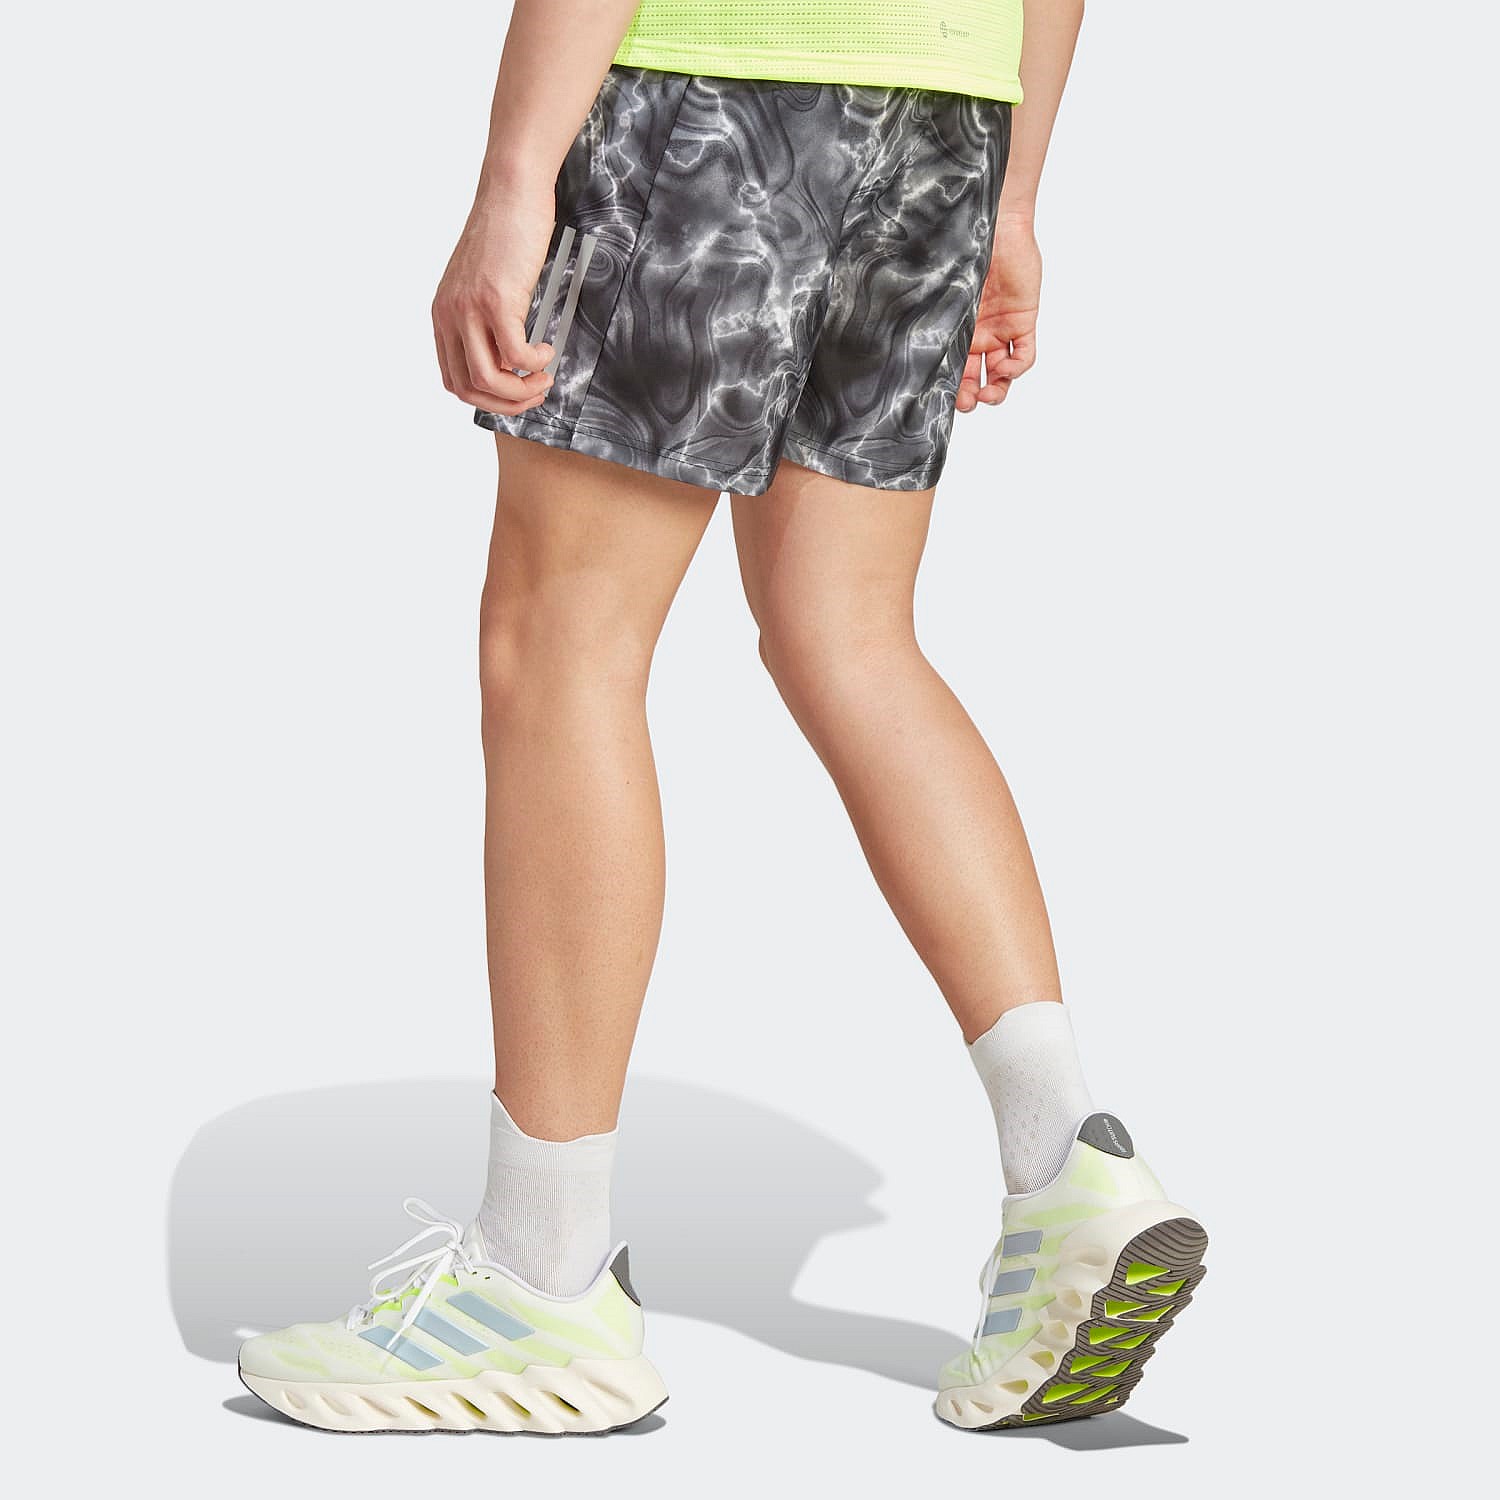 Own Allover Shorts Adidas | The Shorts | Stirling Print Sports Run